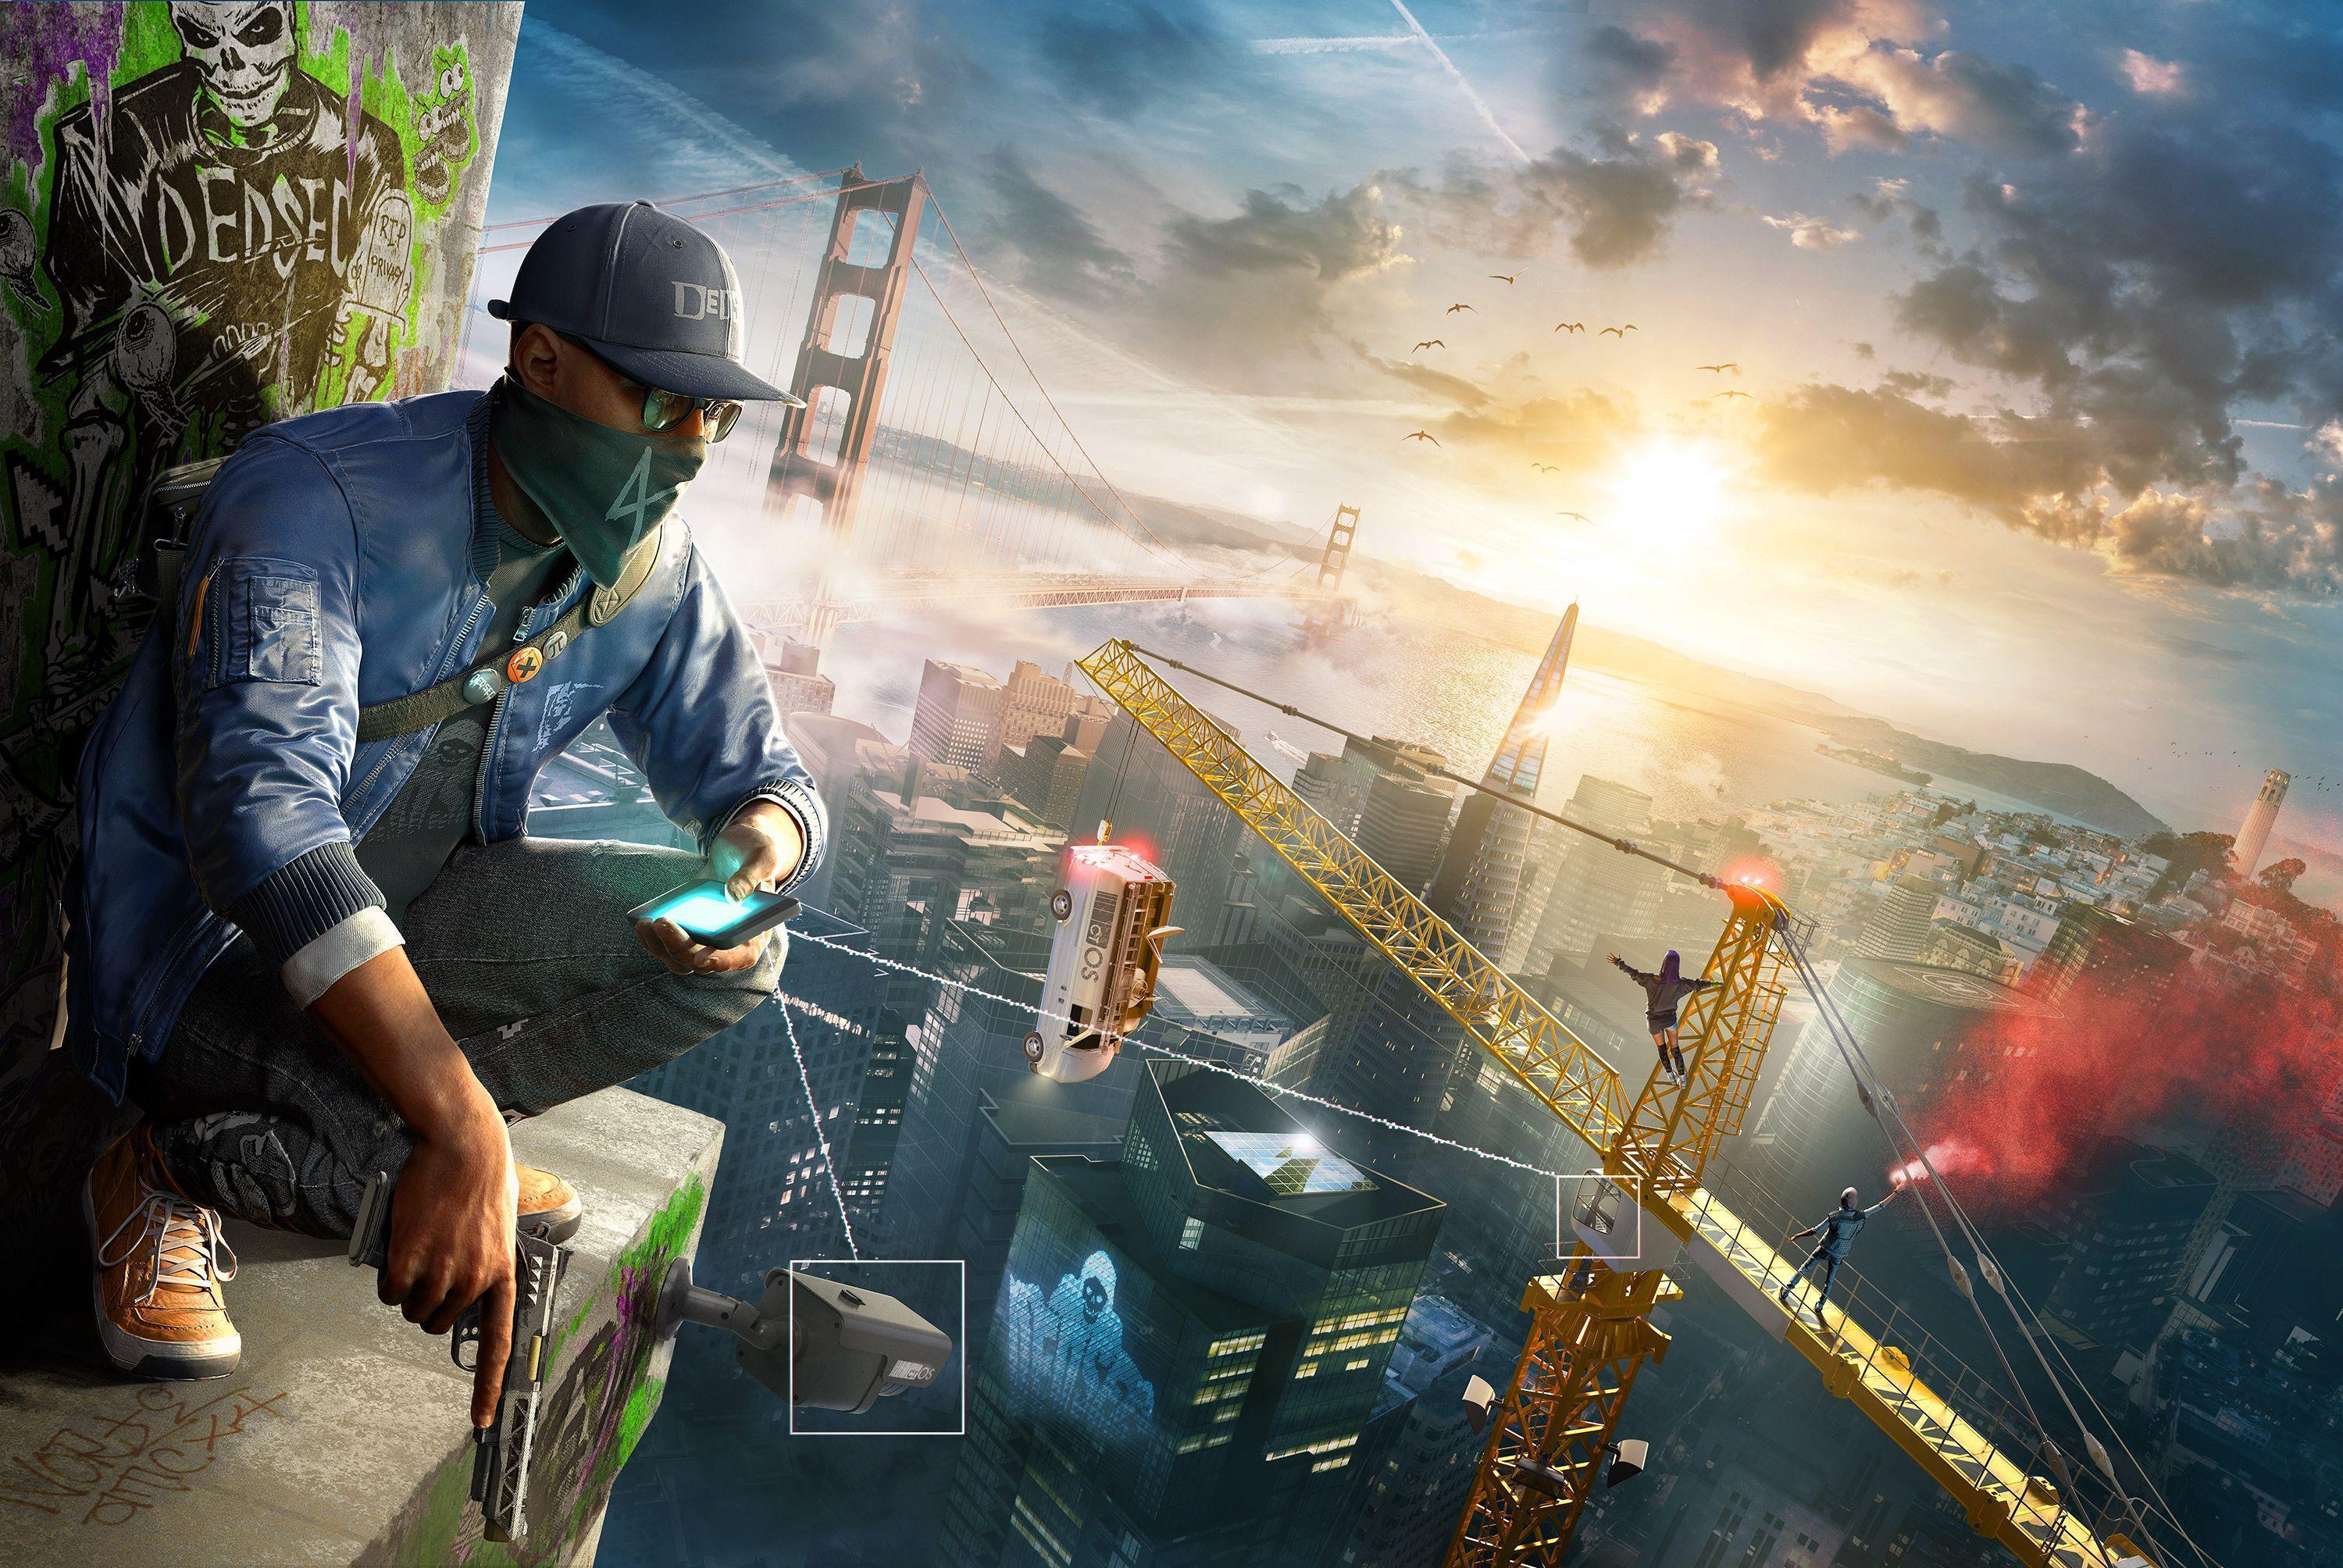 watch dogs 2 pc graphics